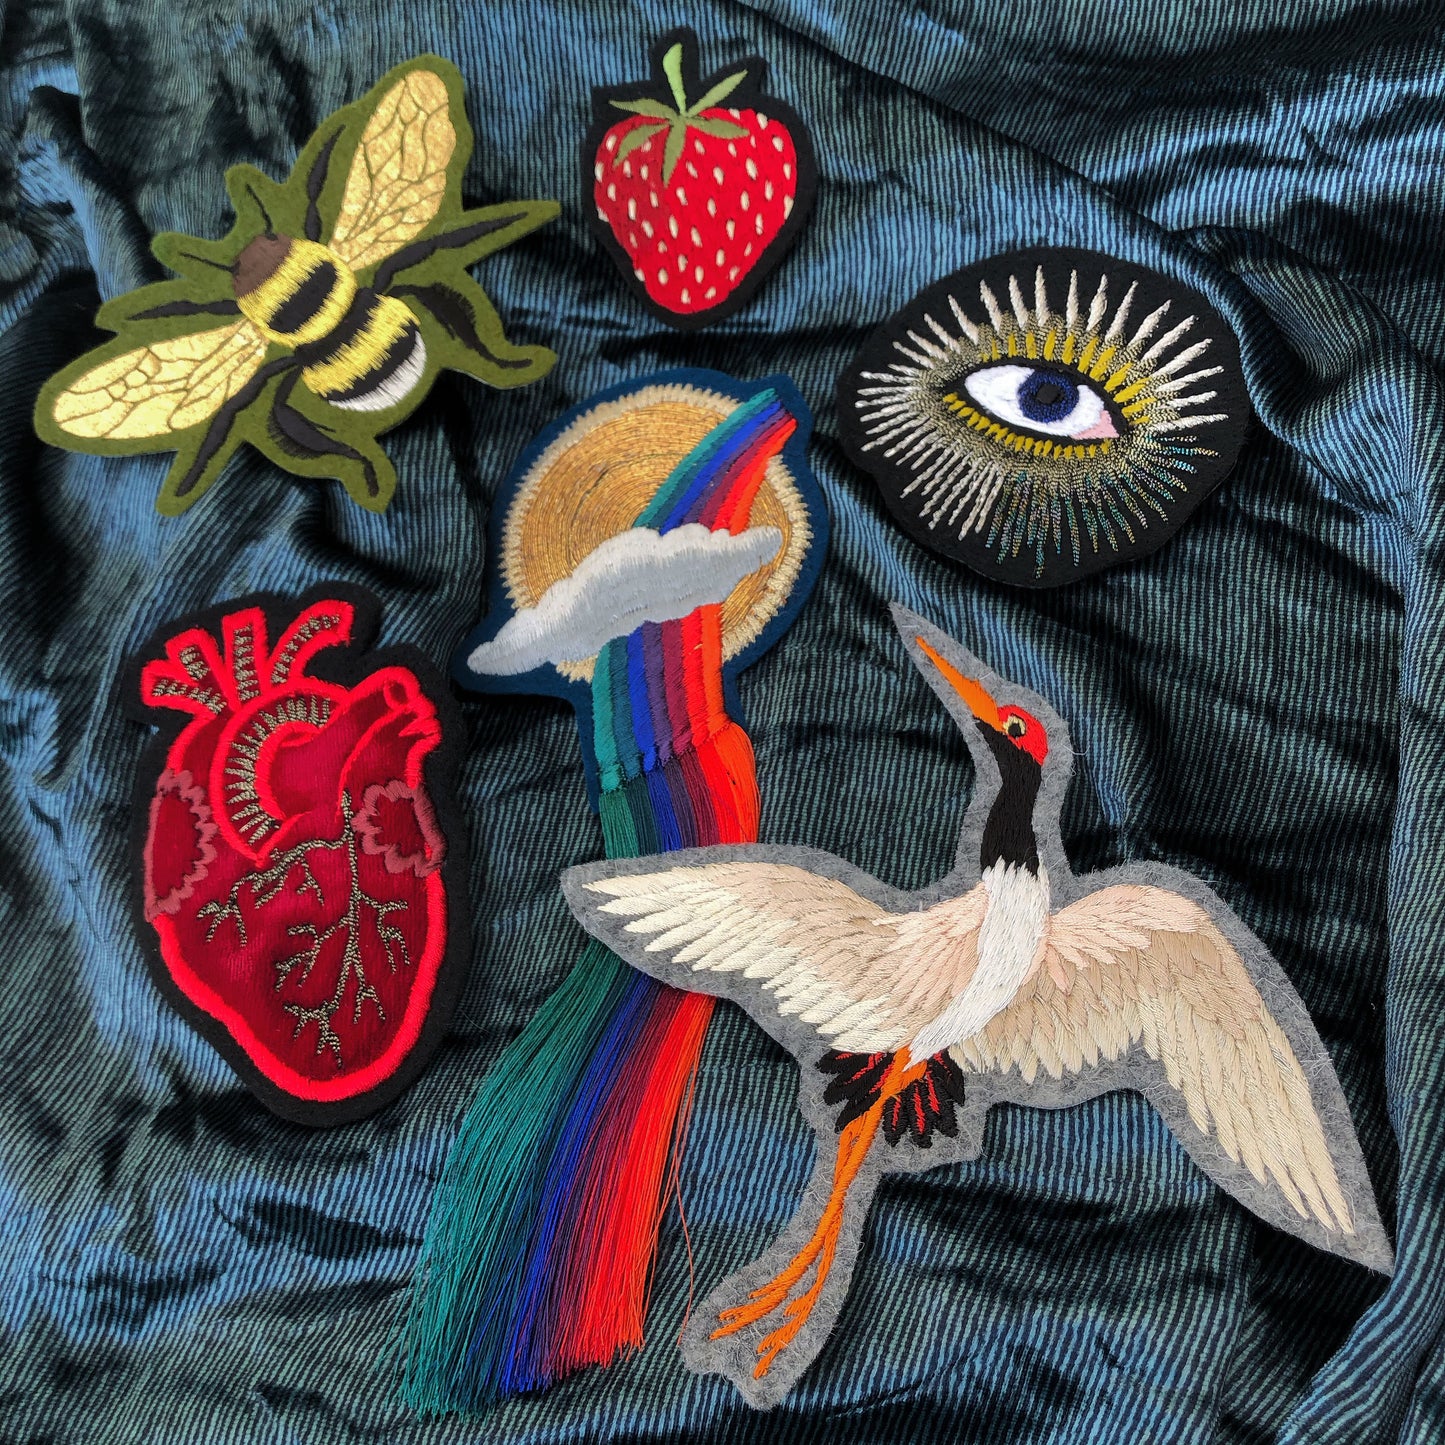 Selection of Ellie Mac embroidered patches on a blue metallic background. Included is strawberry, velvet heart and metallic eye